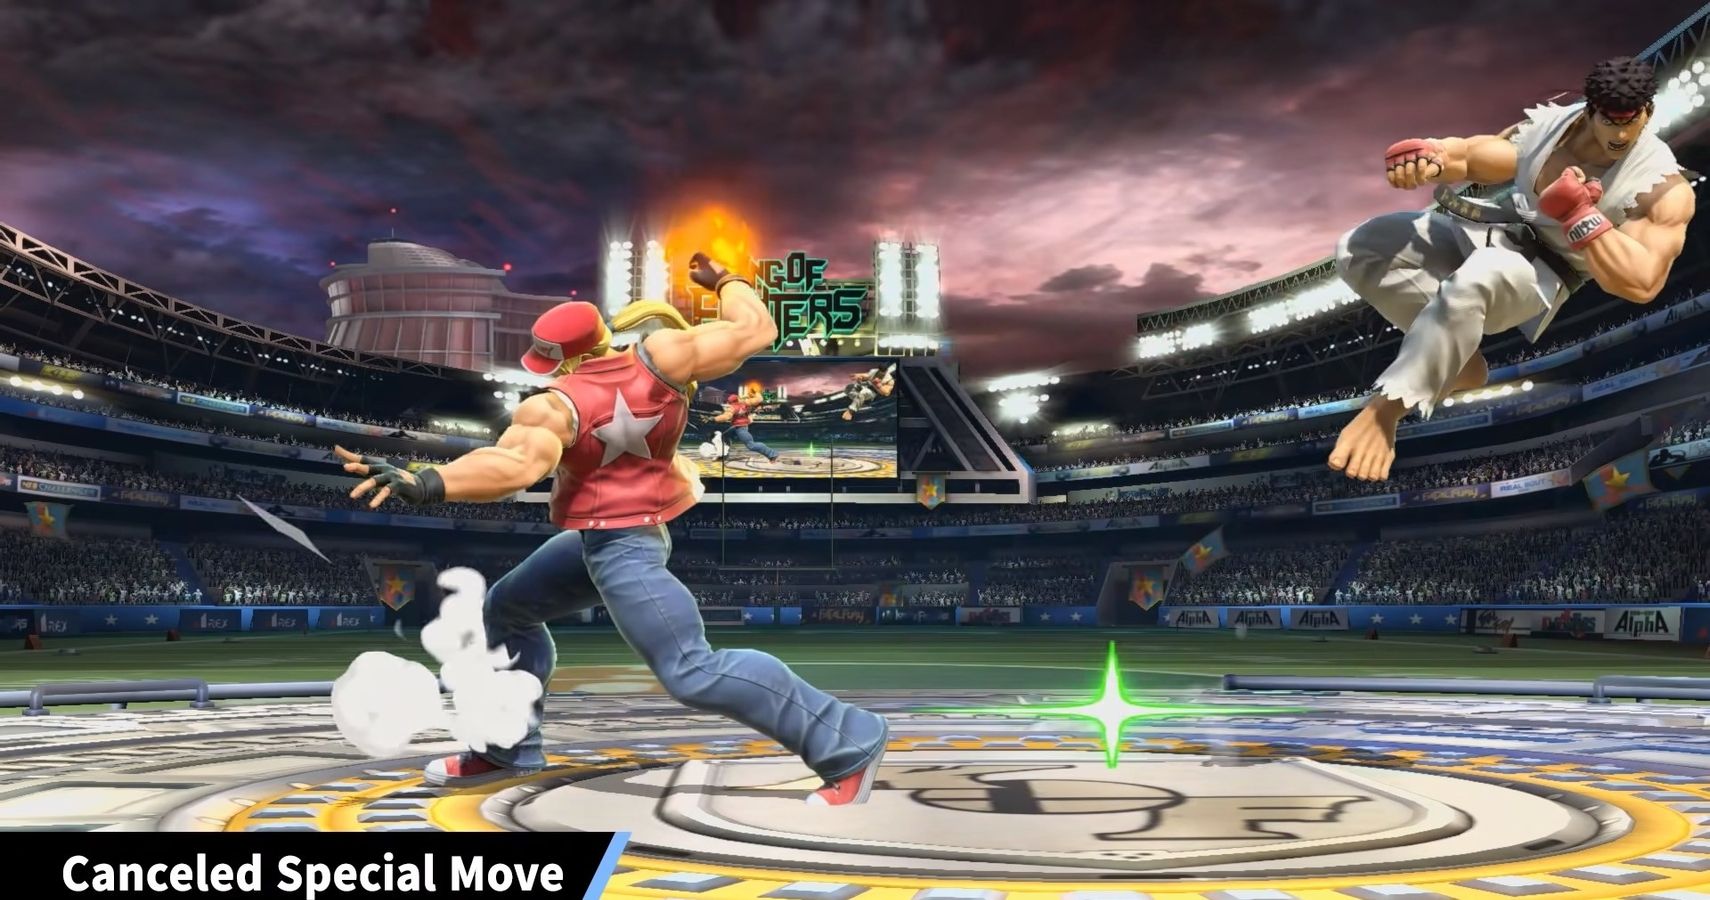 King of Fighters' Terry Bogard attack cancelling Super Smash Bros. Ultimate